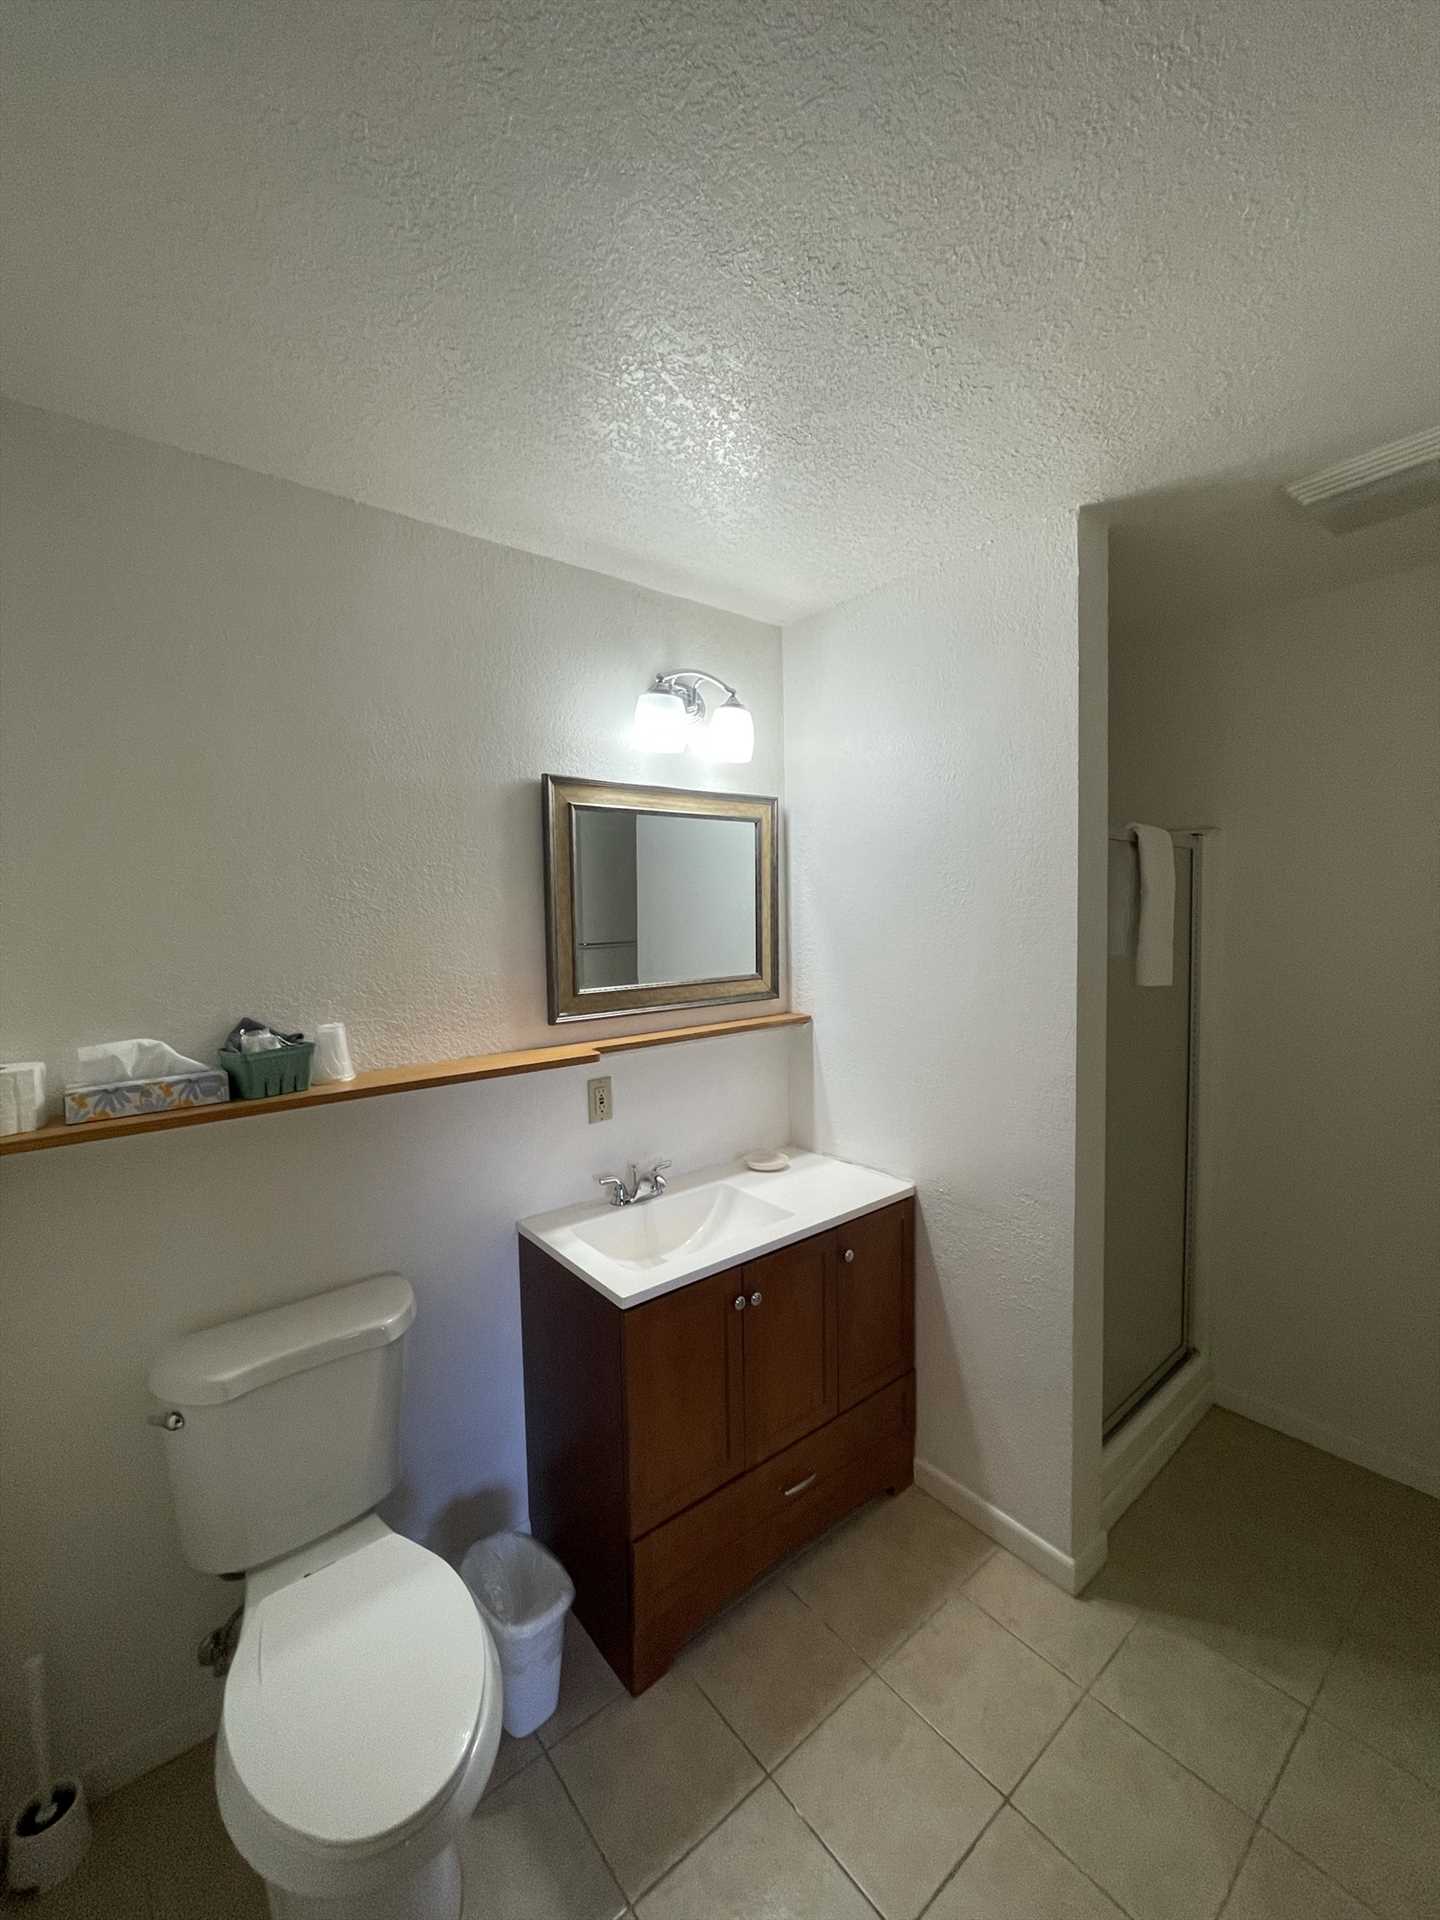                                                 Your spotless full bath features a shower stall, and all the fresh linens you'll need during your stay.